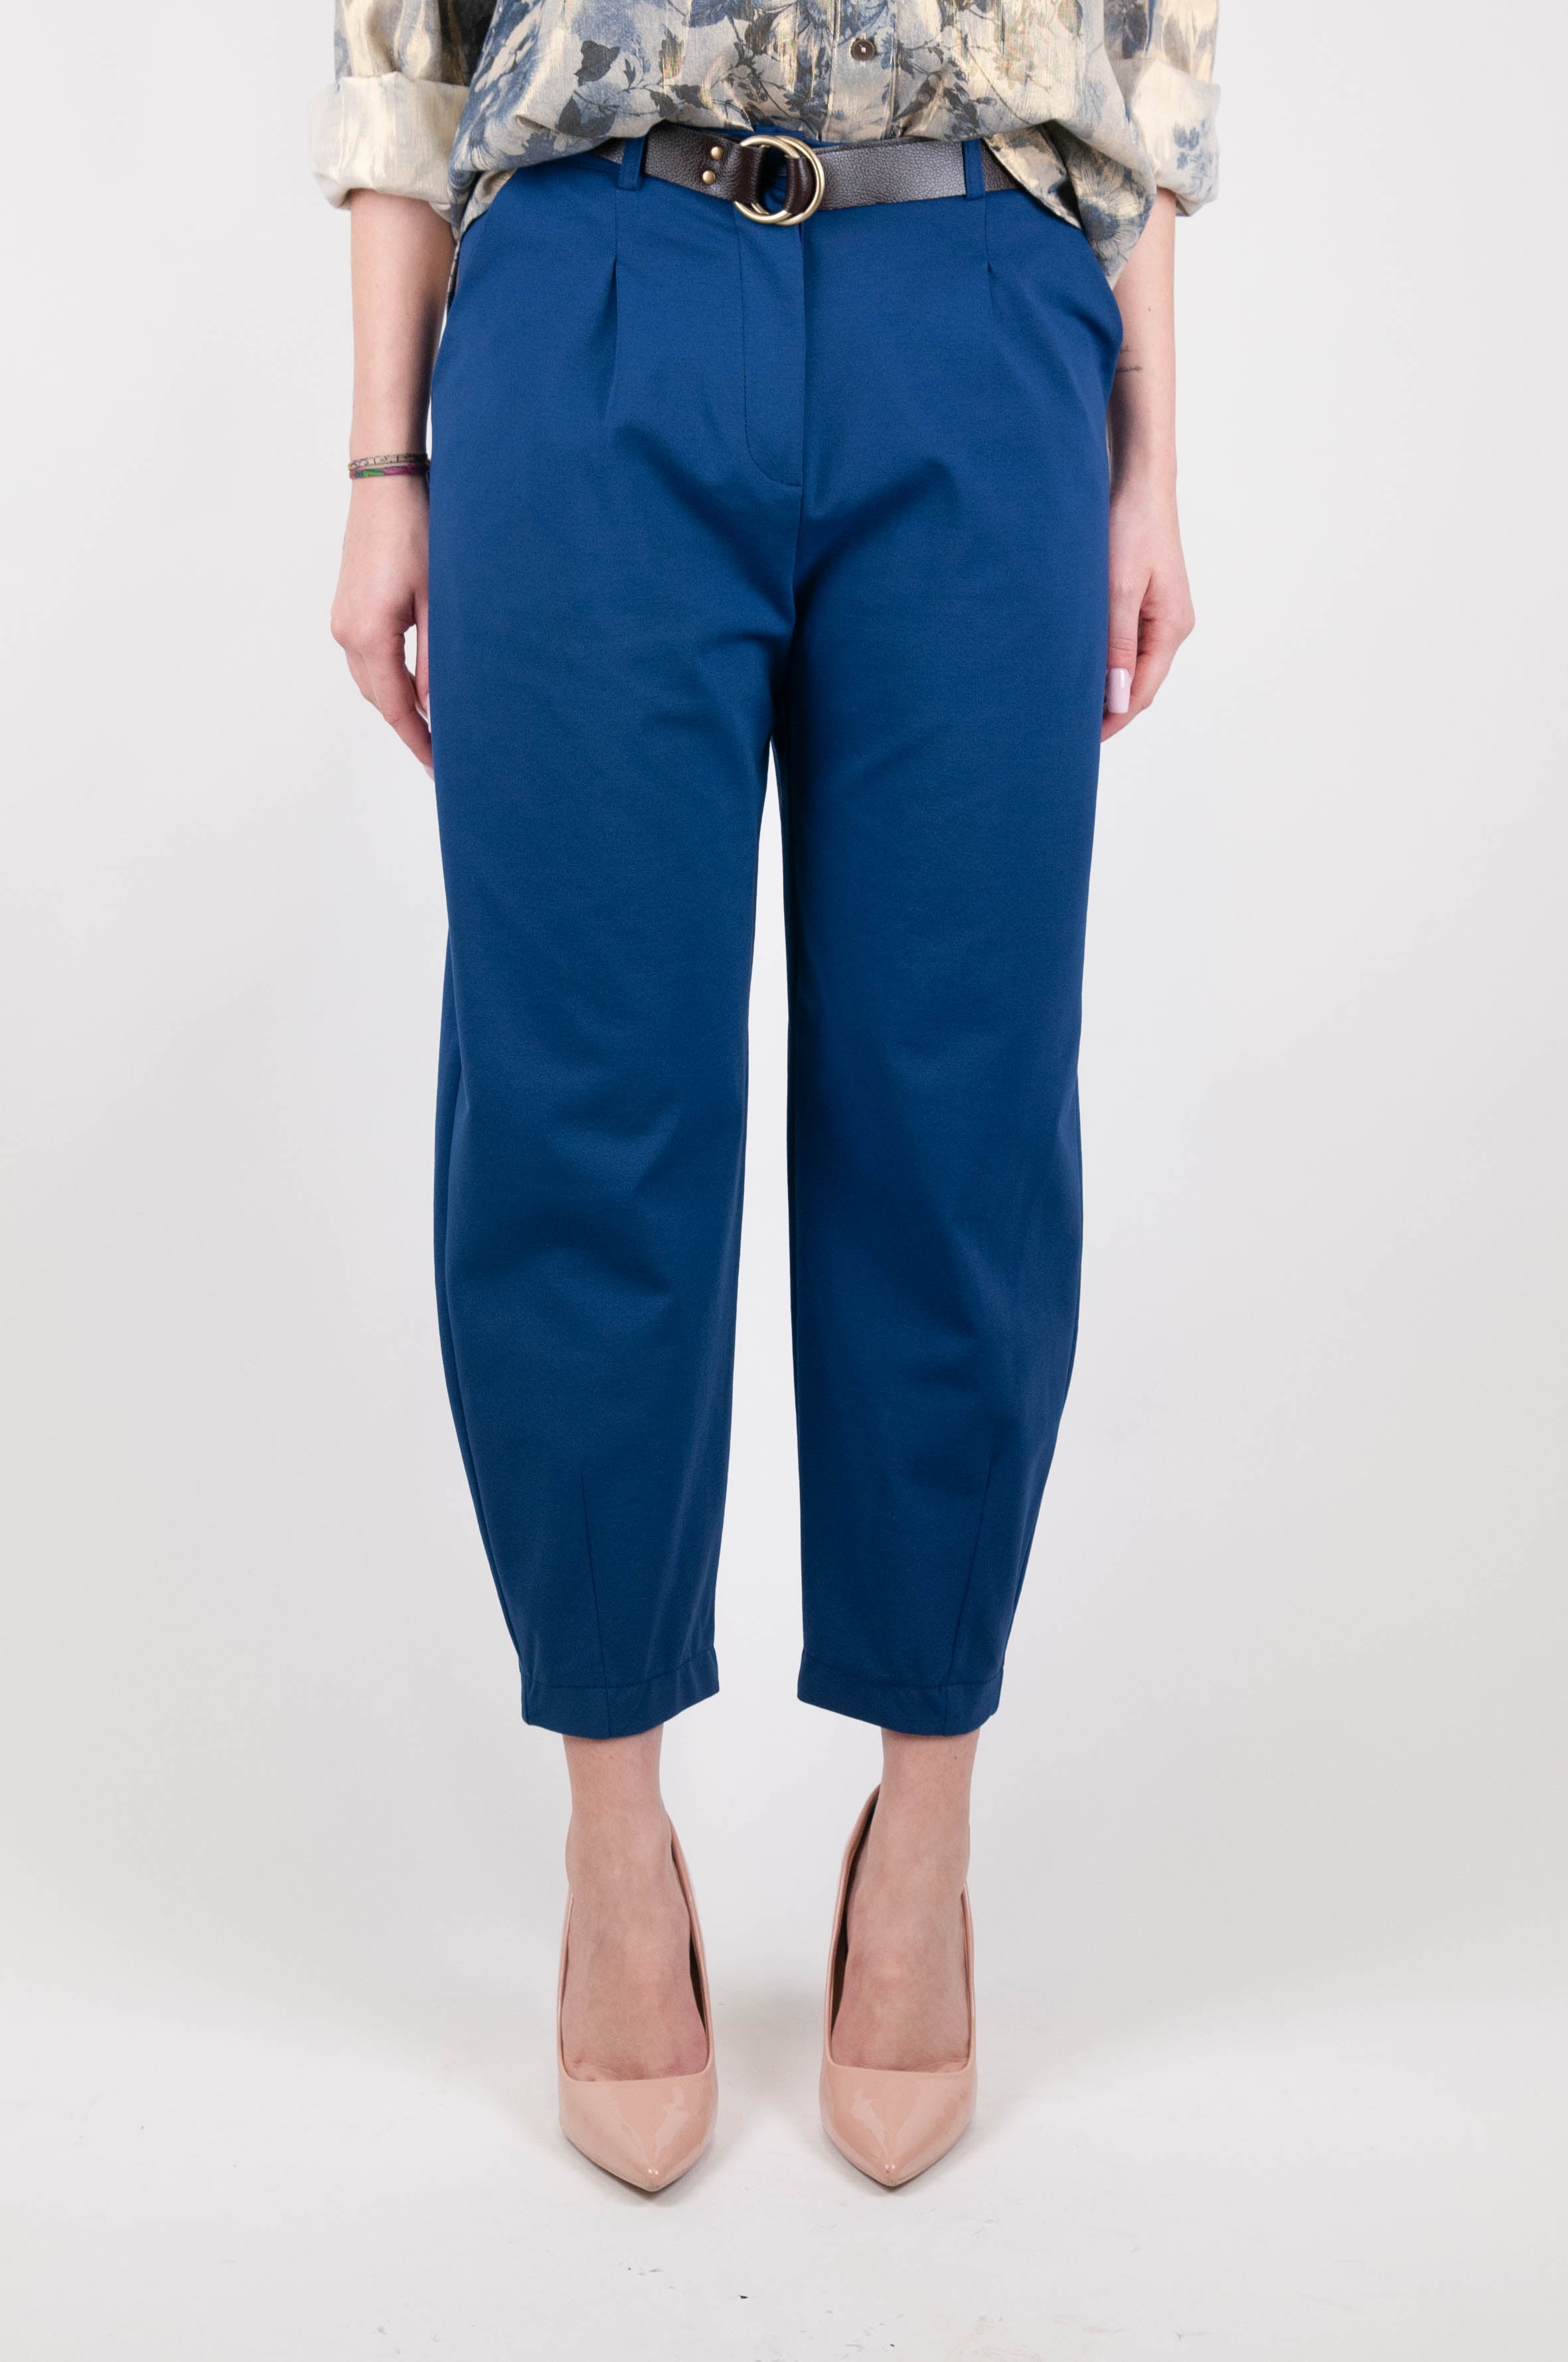 Dixie - Carrot trousers with milan stitch pleats